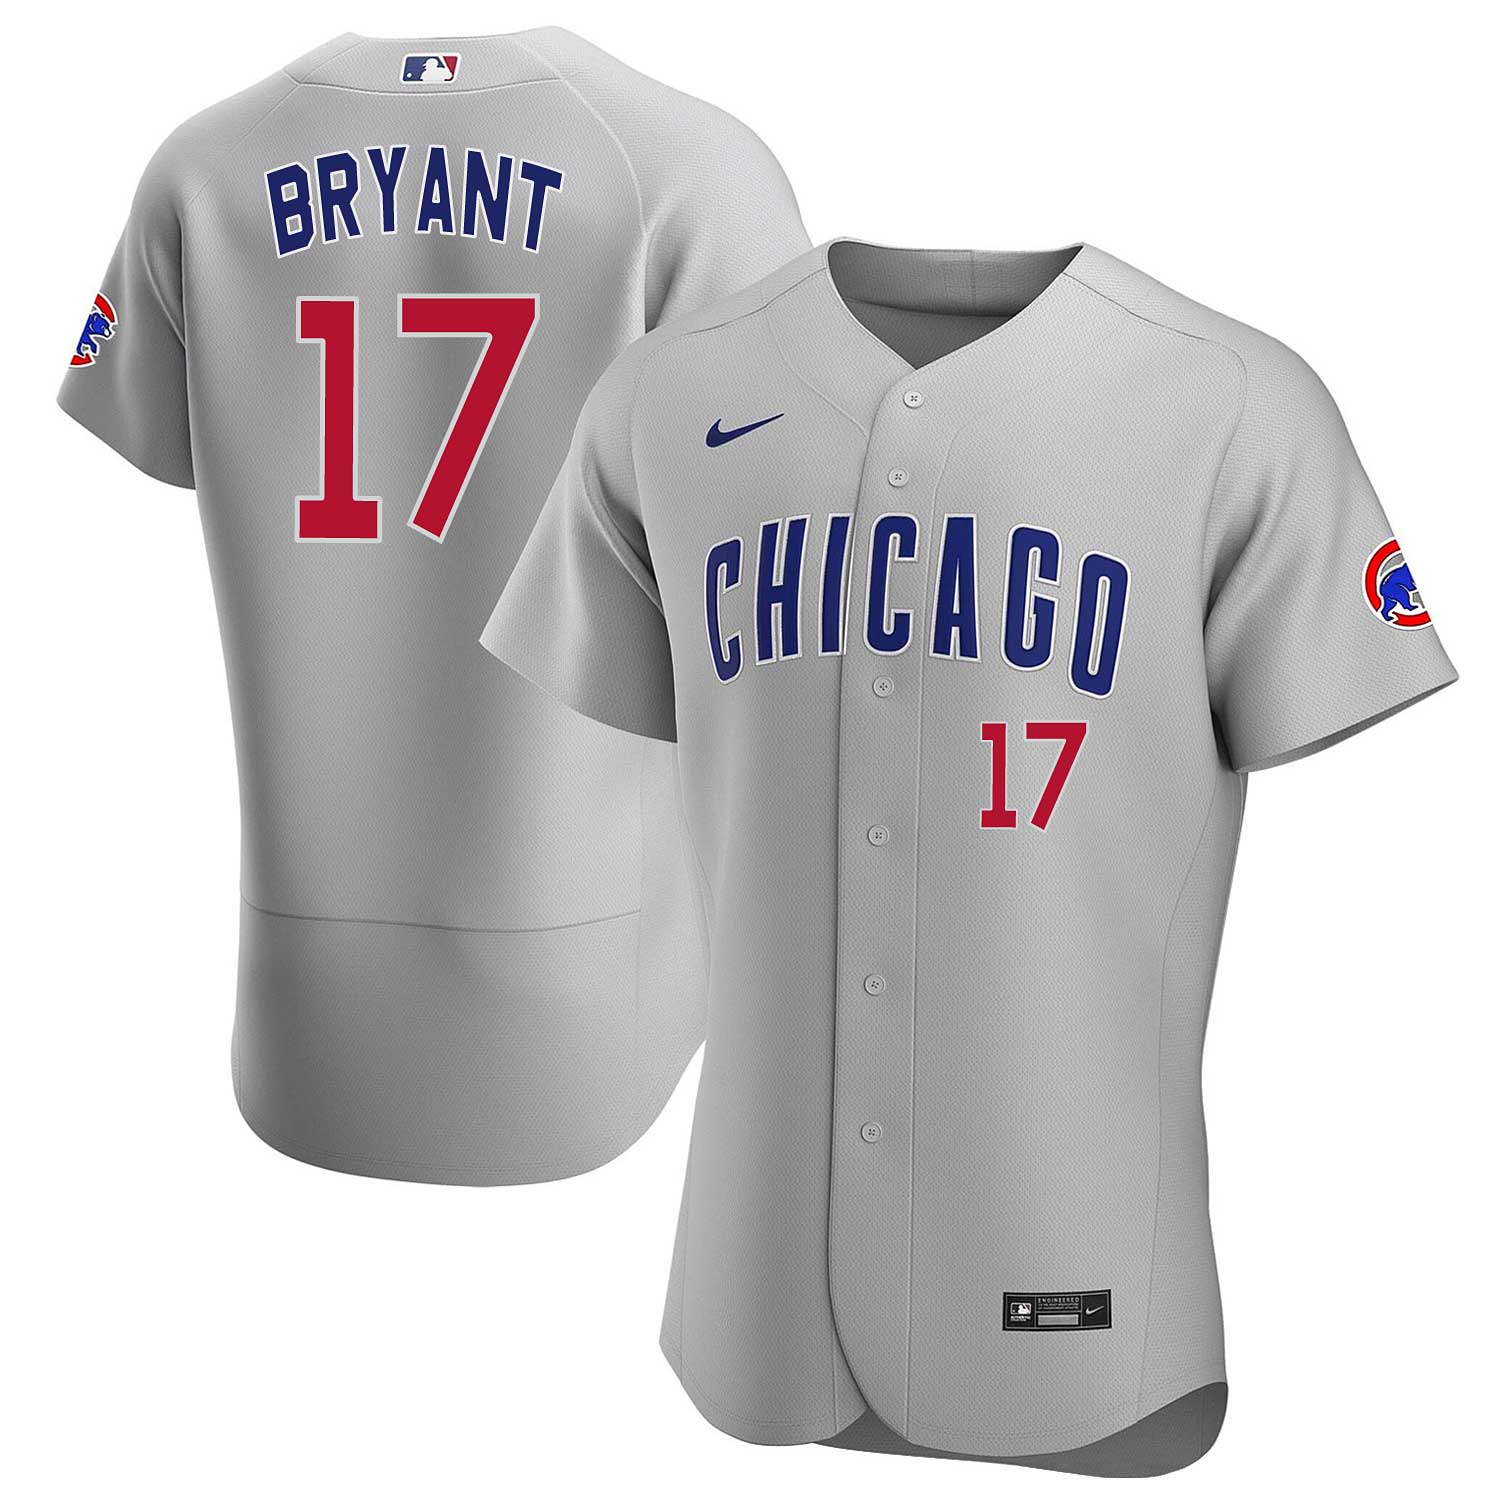 Cubs' Kris Bryant tops MLB's most popular player jersey